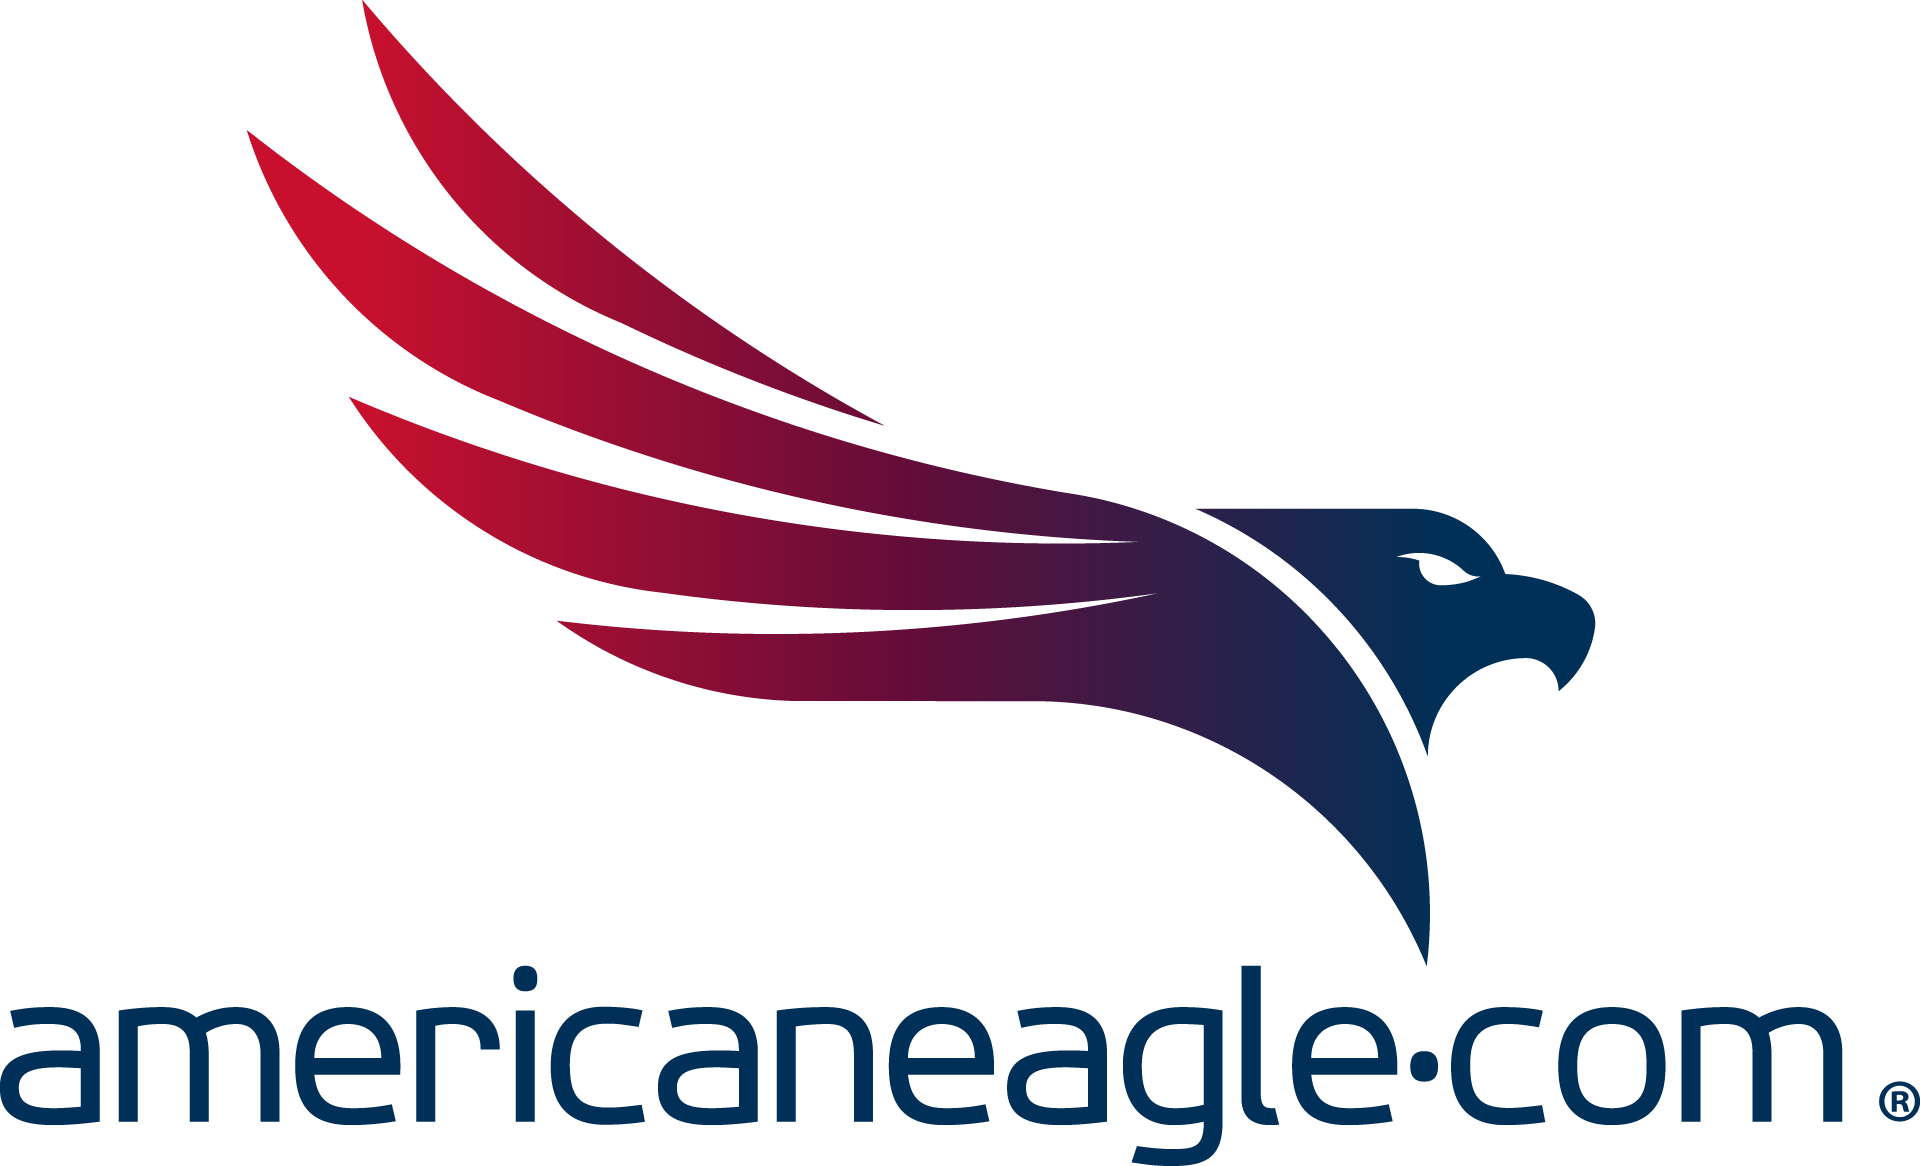 Americaneagle - BigCommerce Implementation Specialist | Full Service Digital Agency